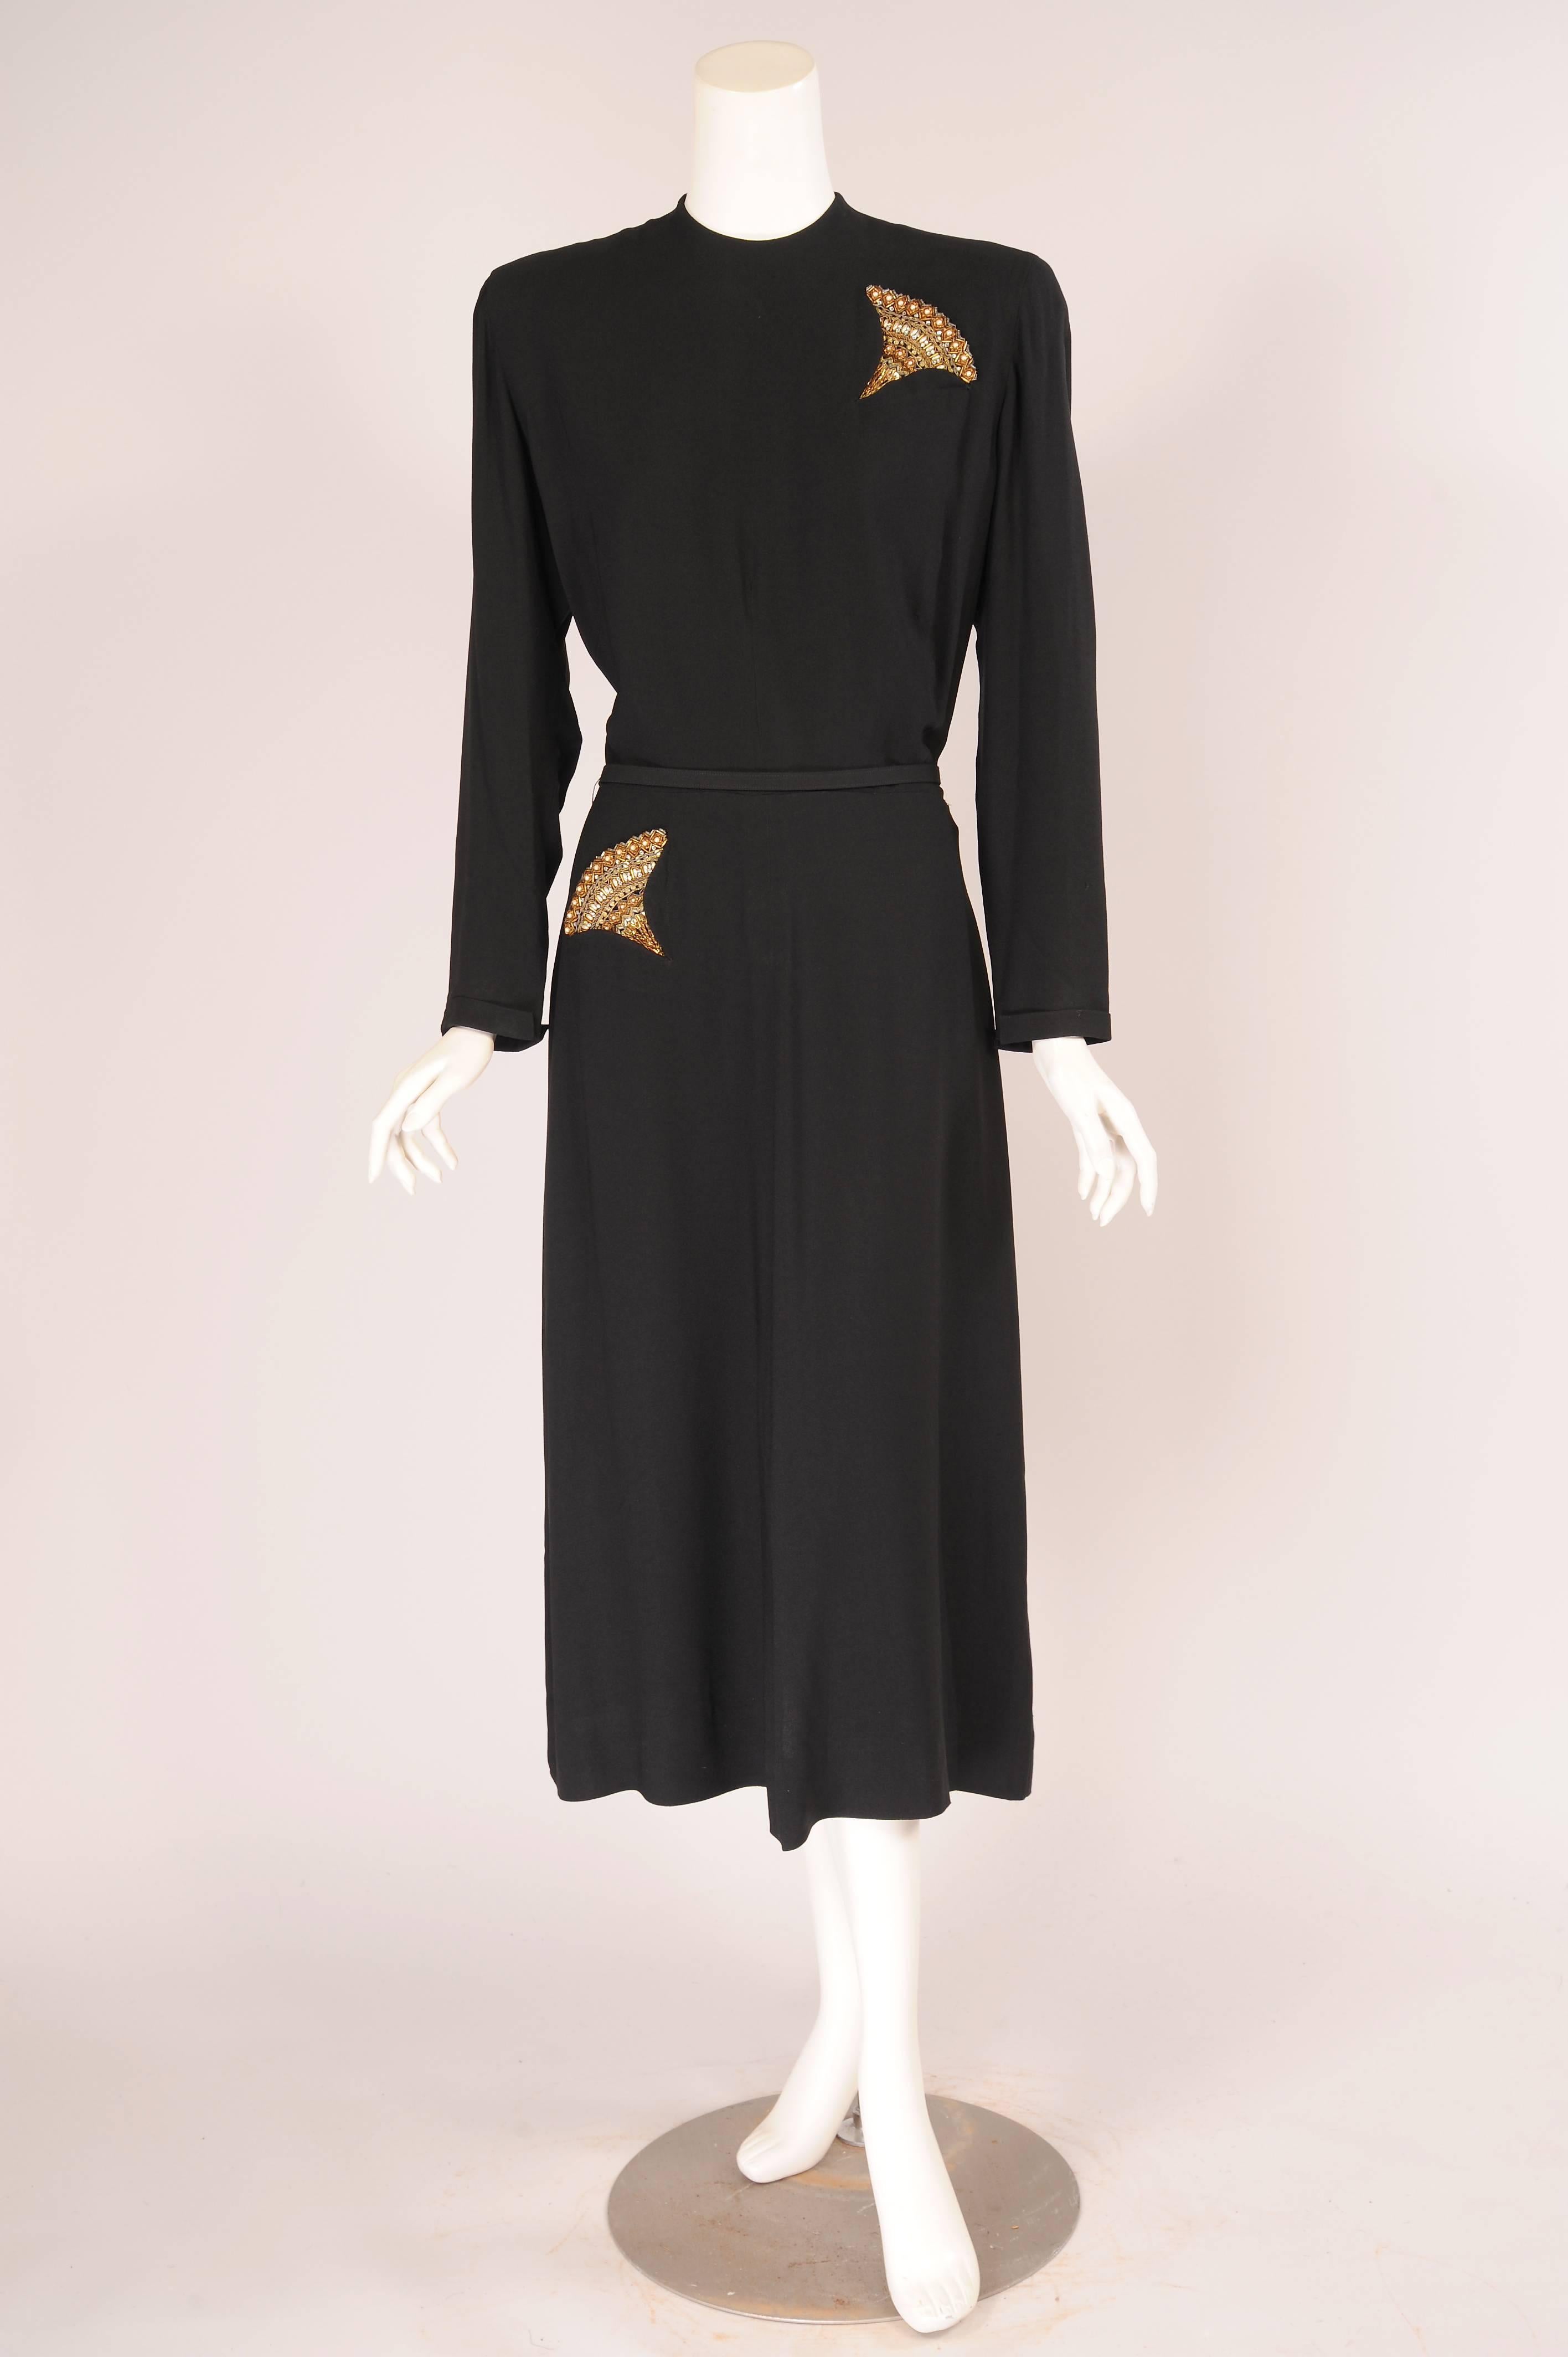 Gold braid, pearls and rhinestones are used for the decorative fan shaped elements emerging from the pockets of this larger size black crepe dress designed by Maurice Rentner. The dress has a dramatic drape at the center back of the mid calf length